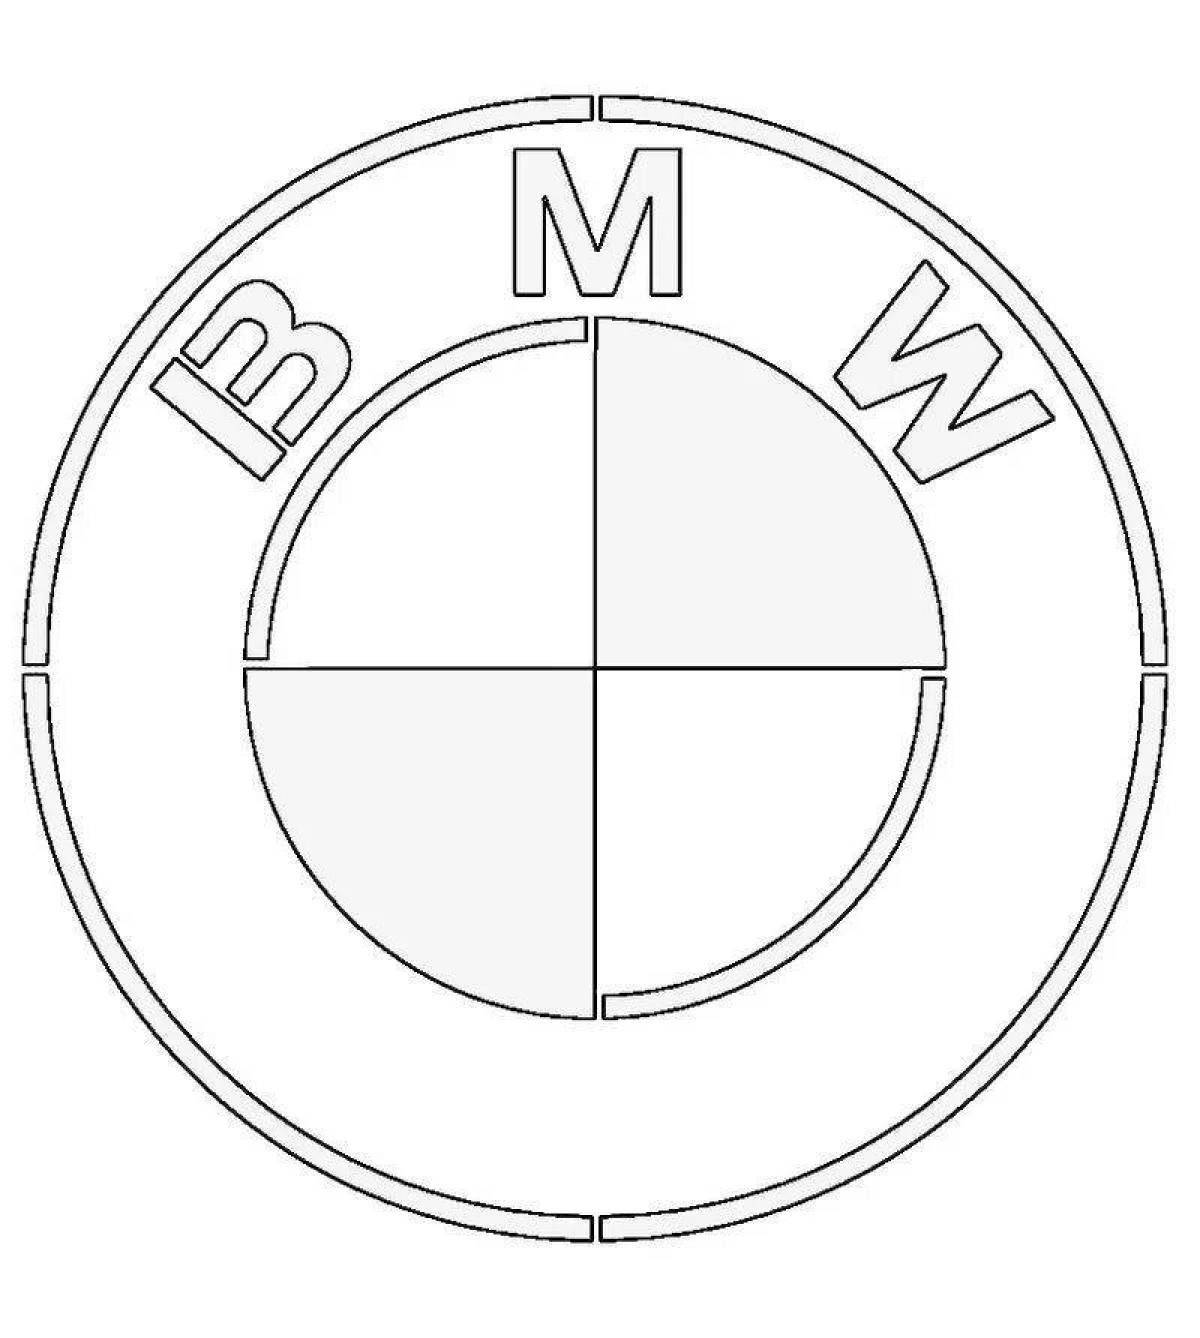 Bmw badge coloring page